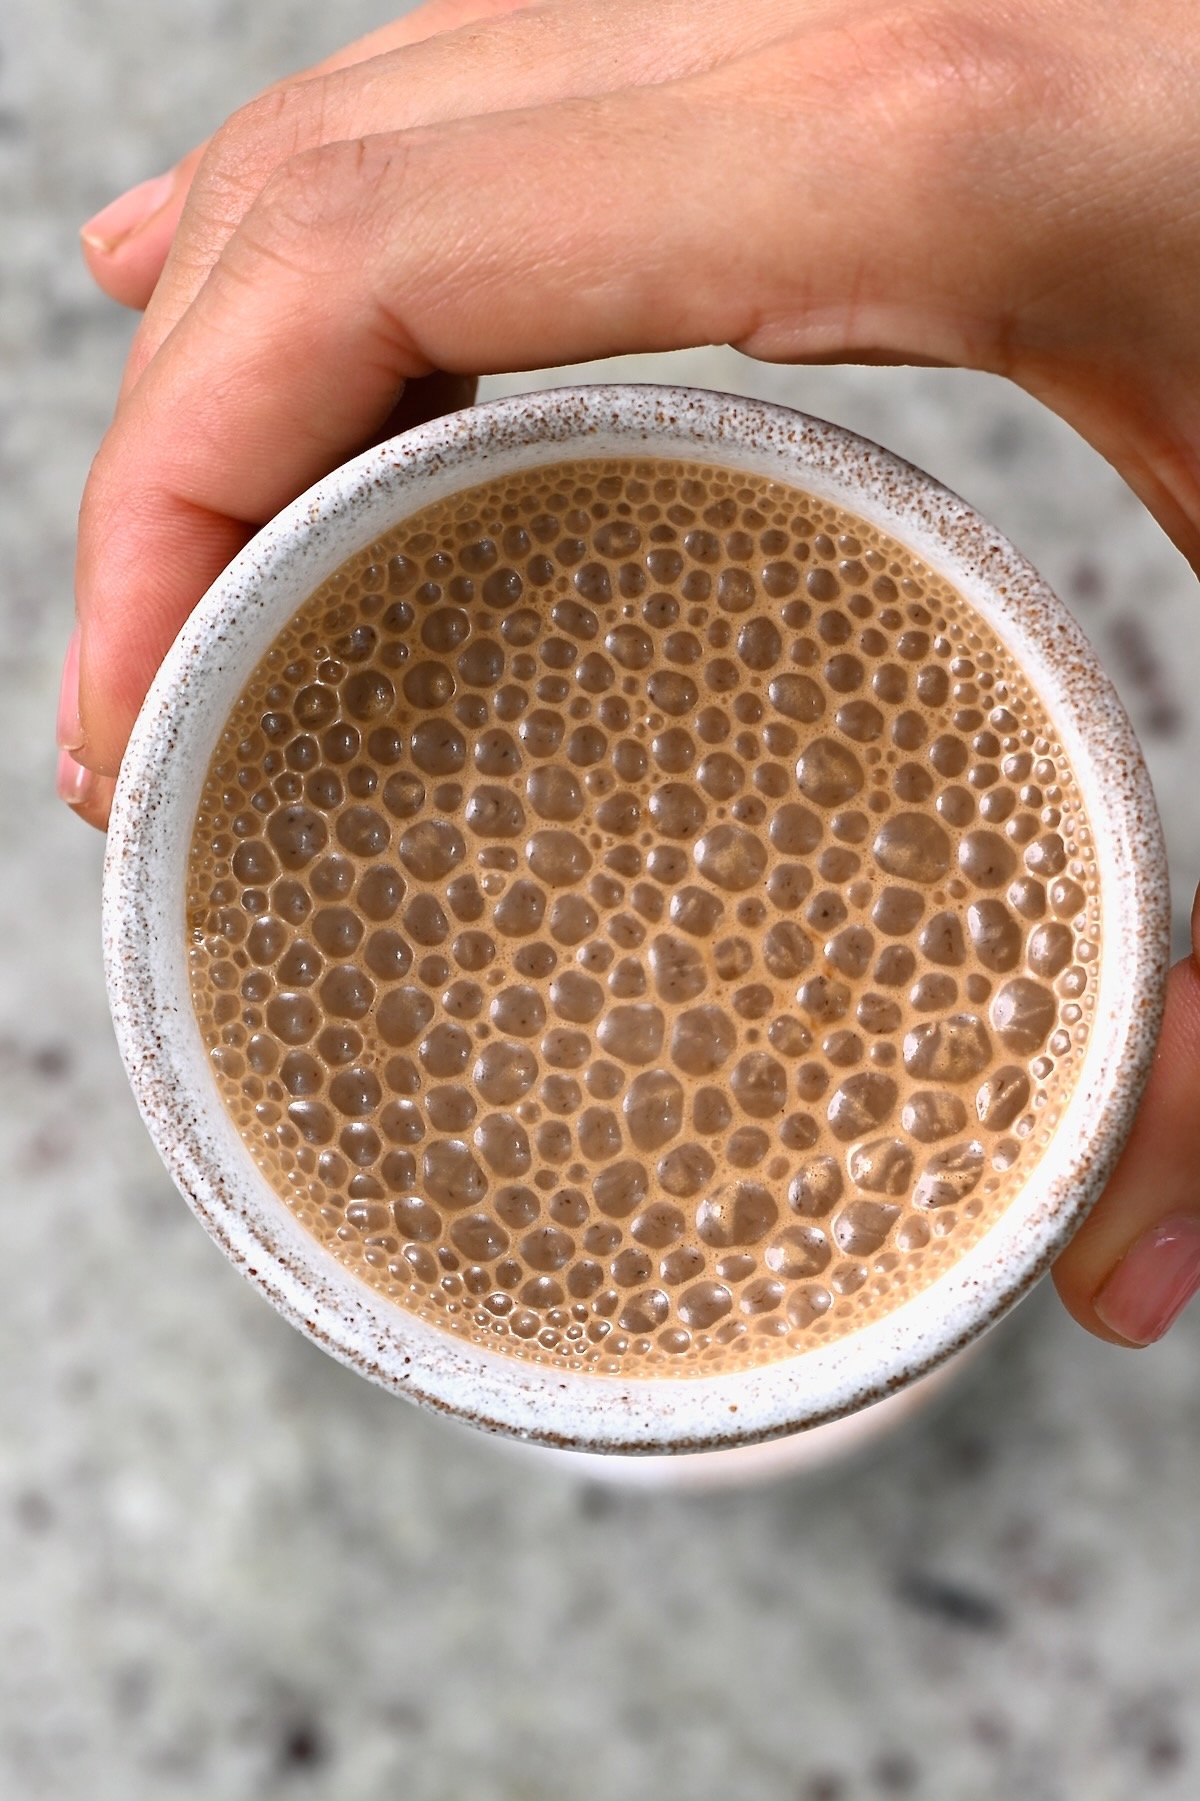 A cup with bulletproof coffee